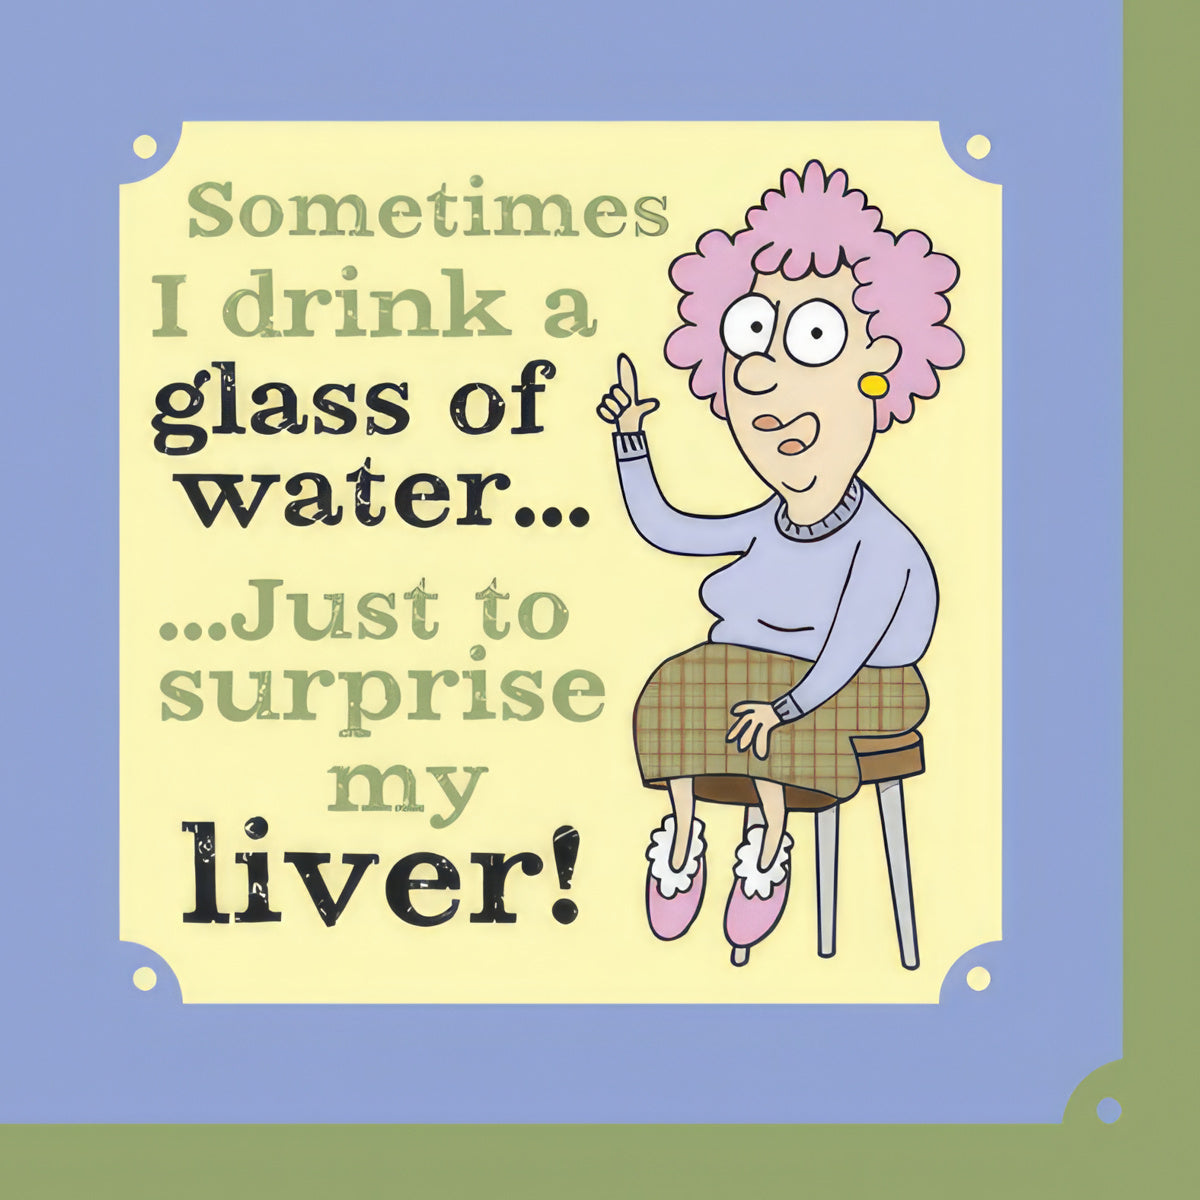 Sometimes I drink a glass of water...